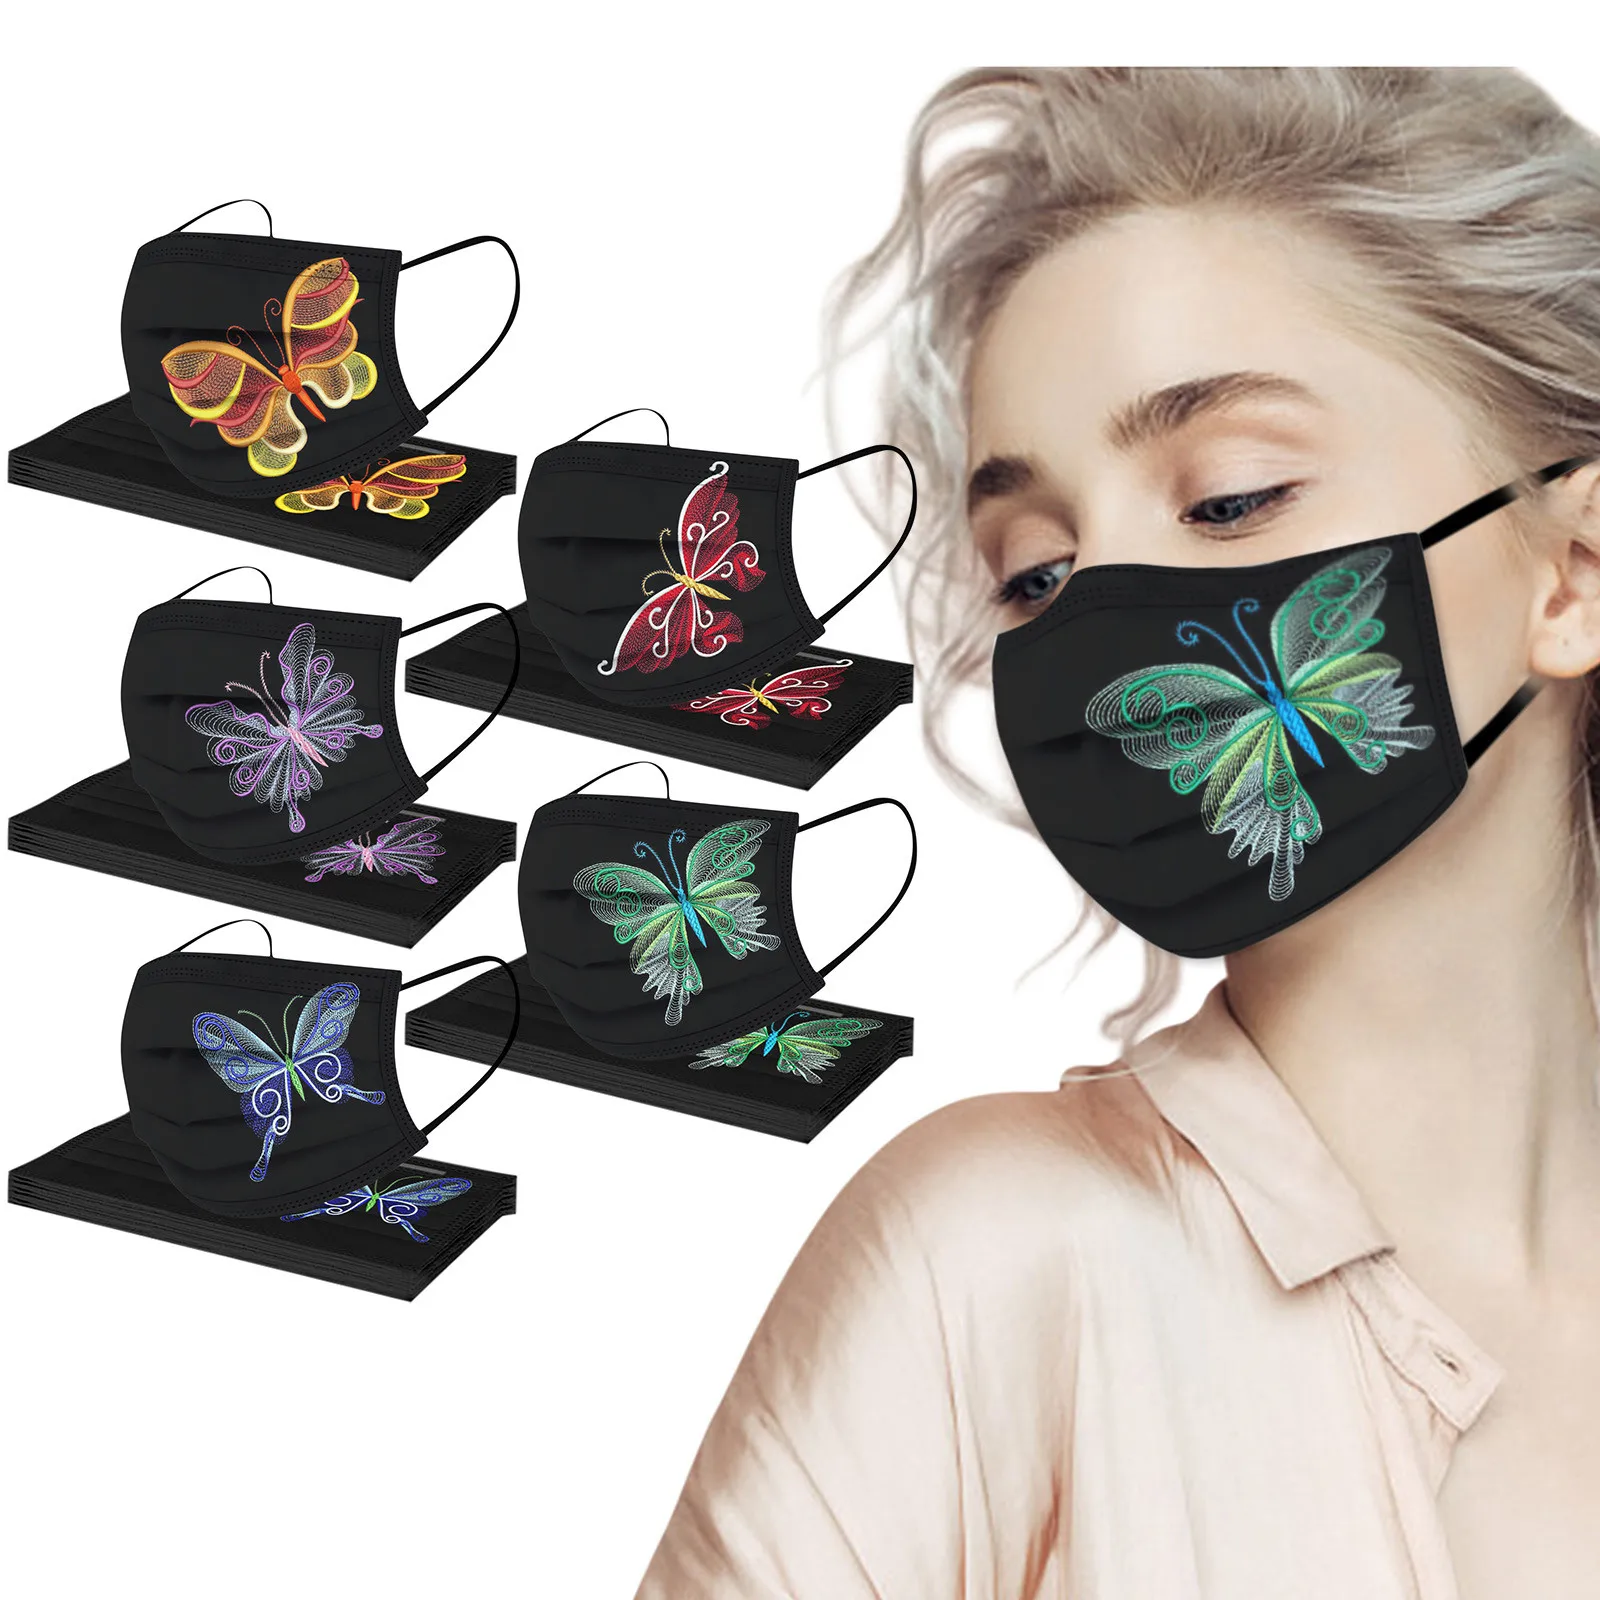 

50pc Women Disposable Masks Butterfly Floral Print Multicolor Adult Protection 3ply Mouth Masks Pm2.5 Masque Decoration